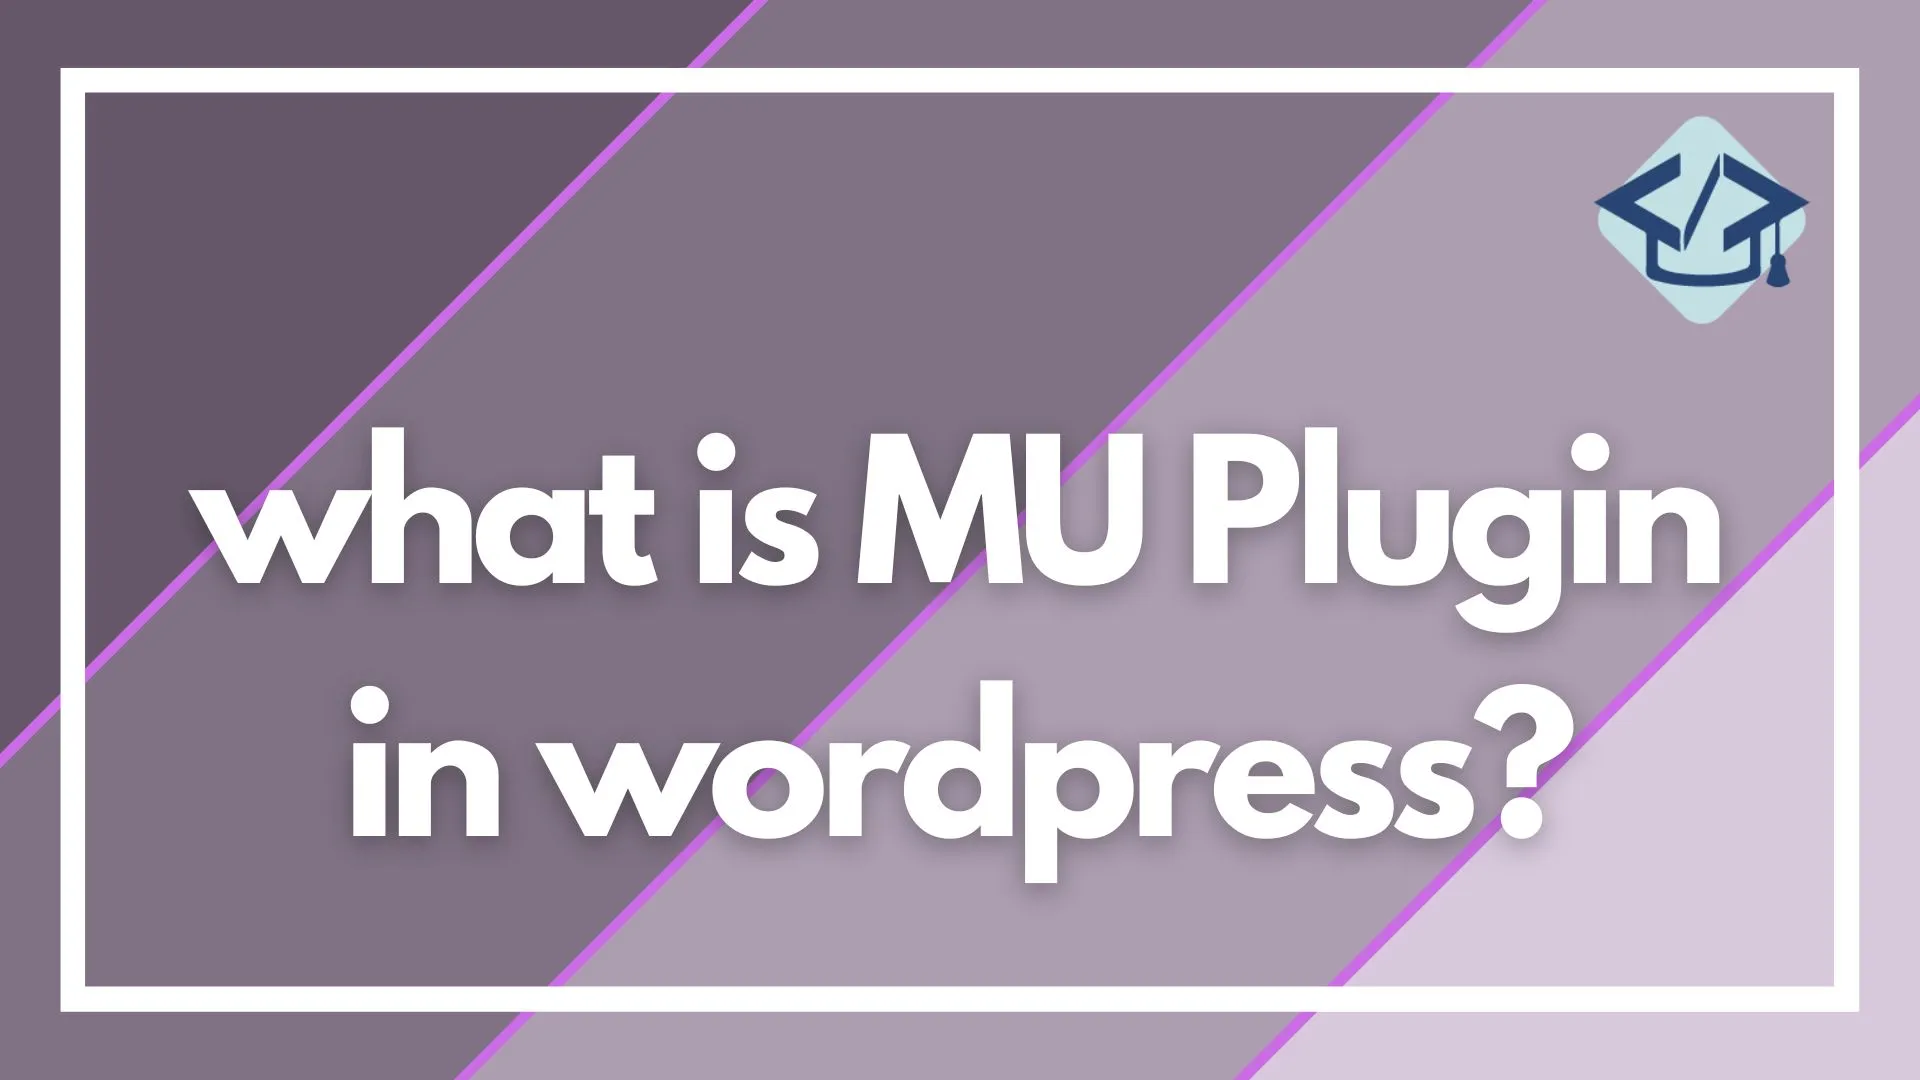 You are currently viewing what is MU Plugin in WordPress?